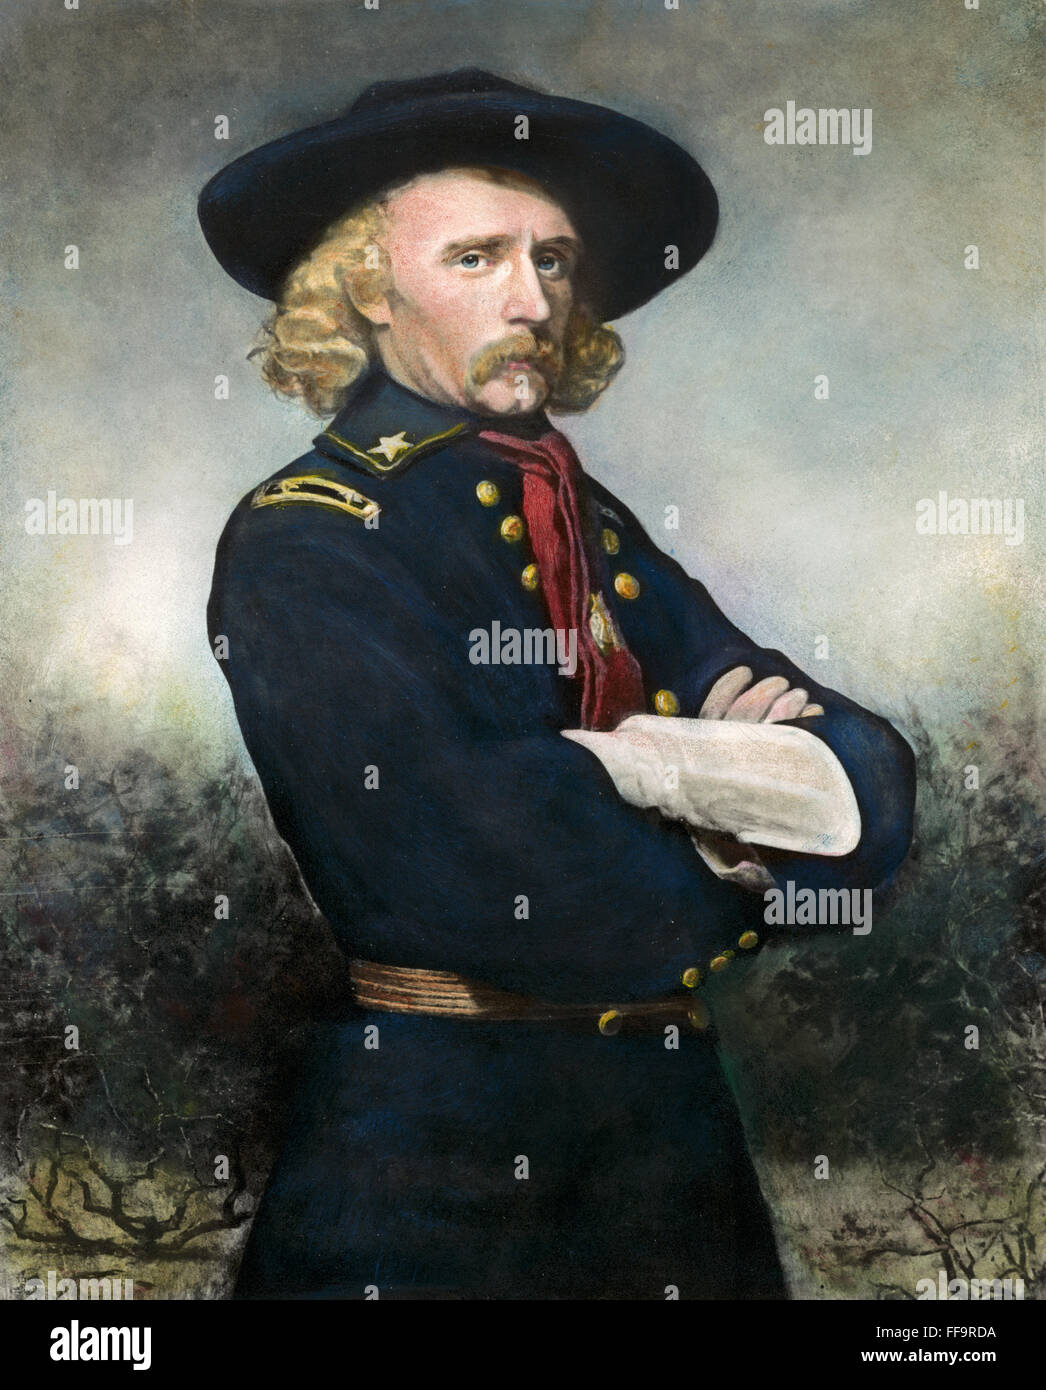 GEORGE ARMSTRONG CUSTER /n(1839-1876). American army officer. After the painting by Alexander Lawrie (1828-1917). Stock Photo